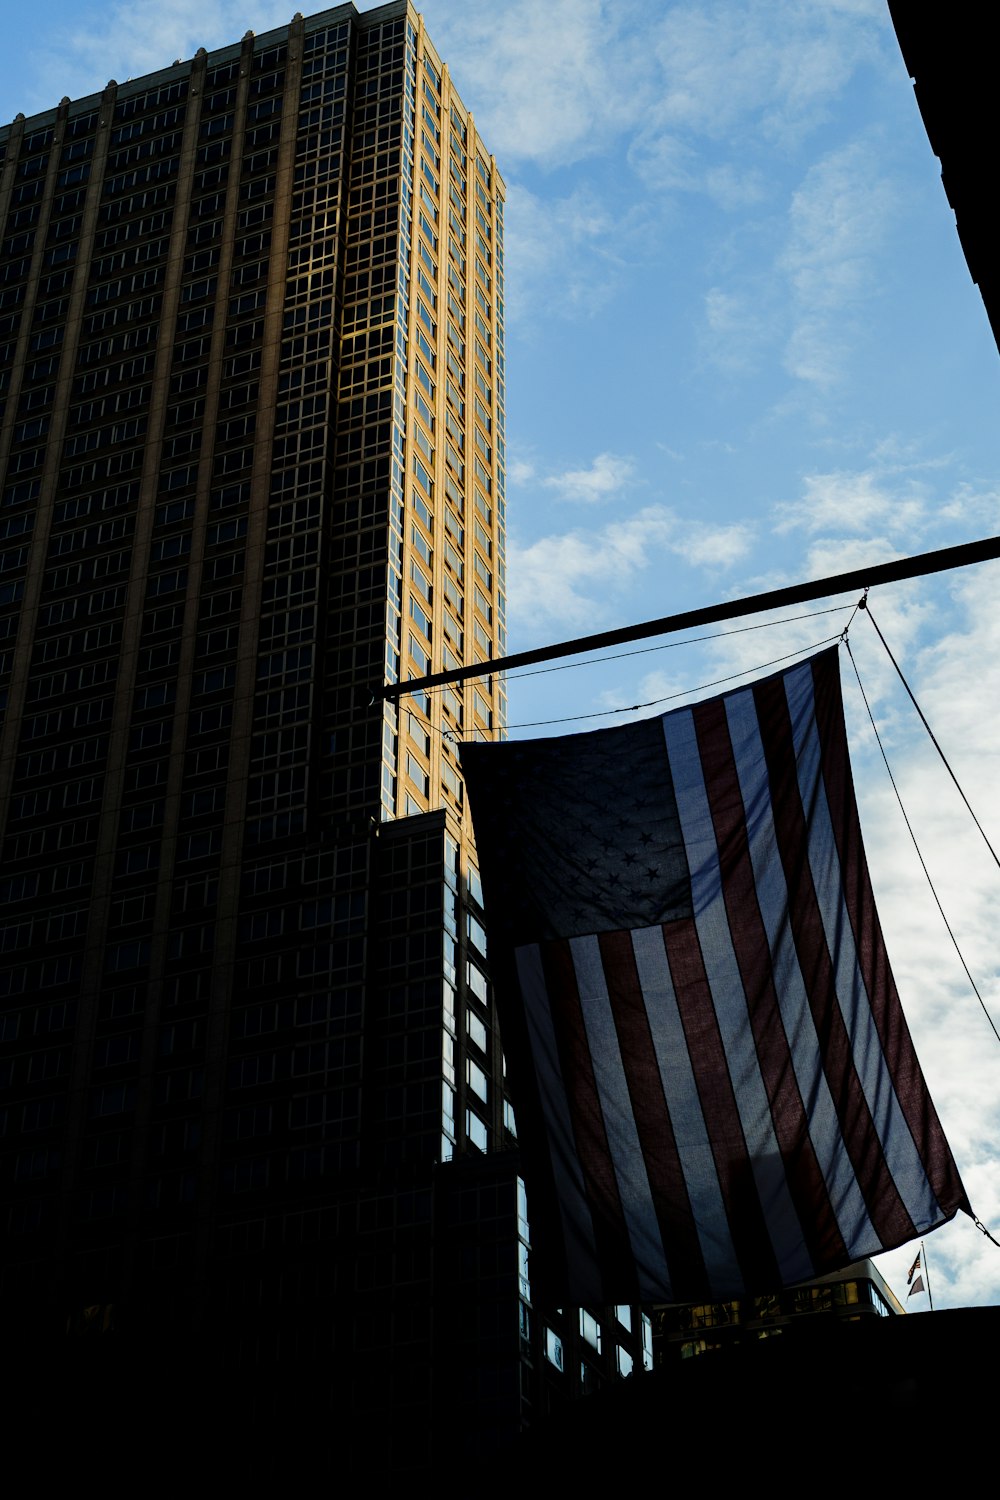 an american flag hanging from a street light in front of a tall building